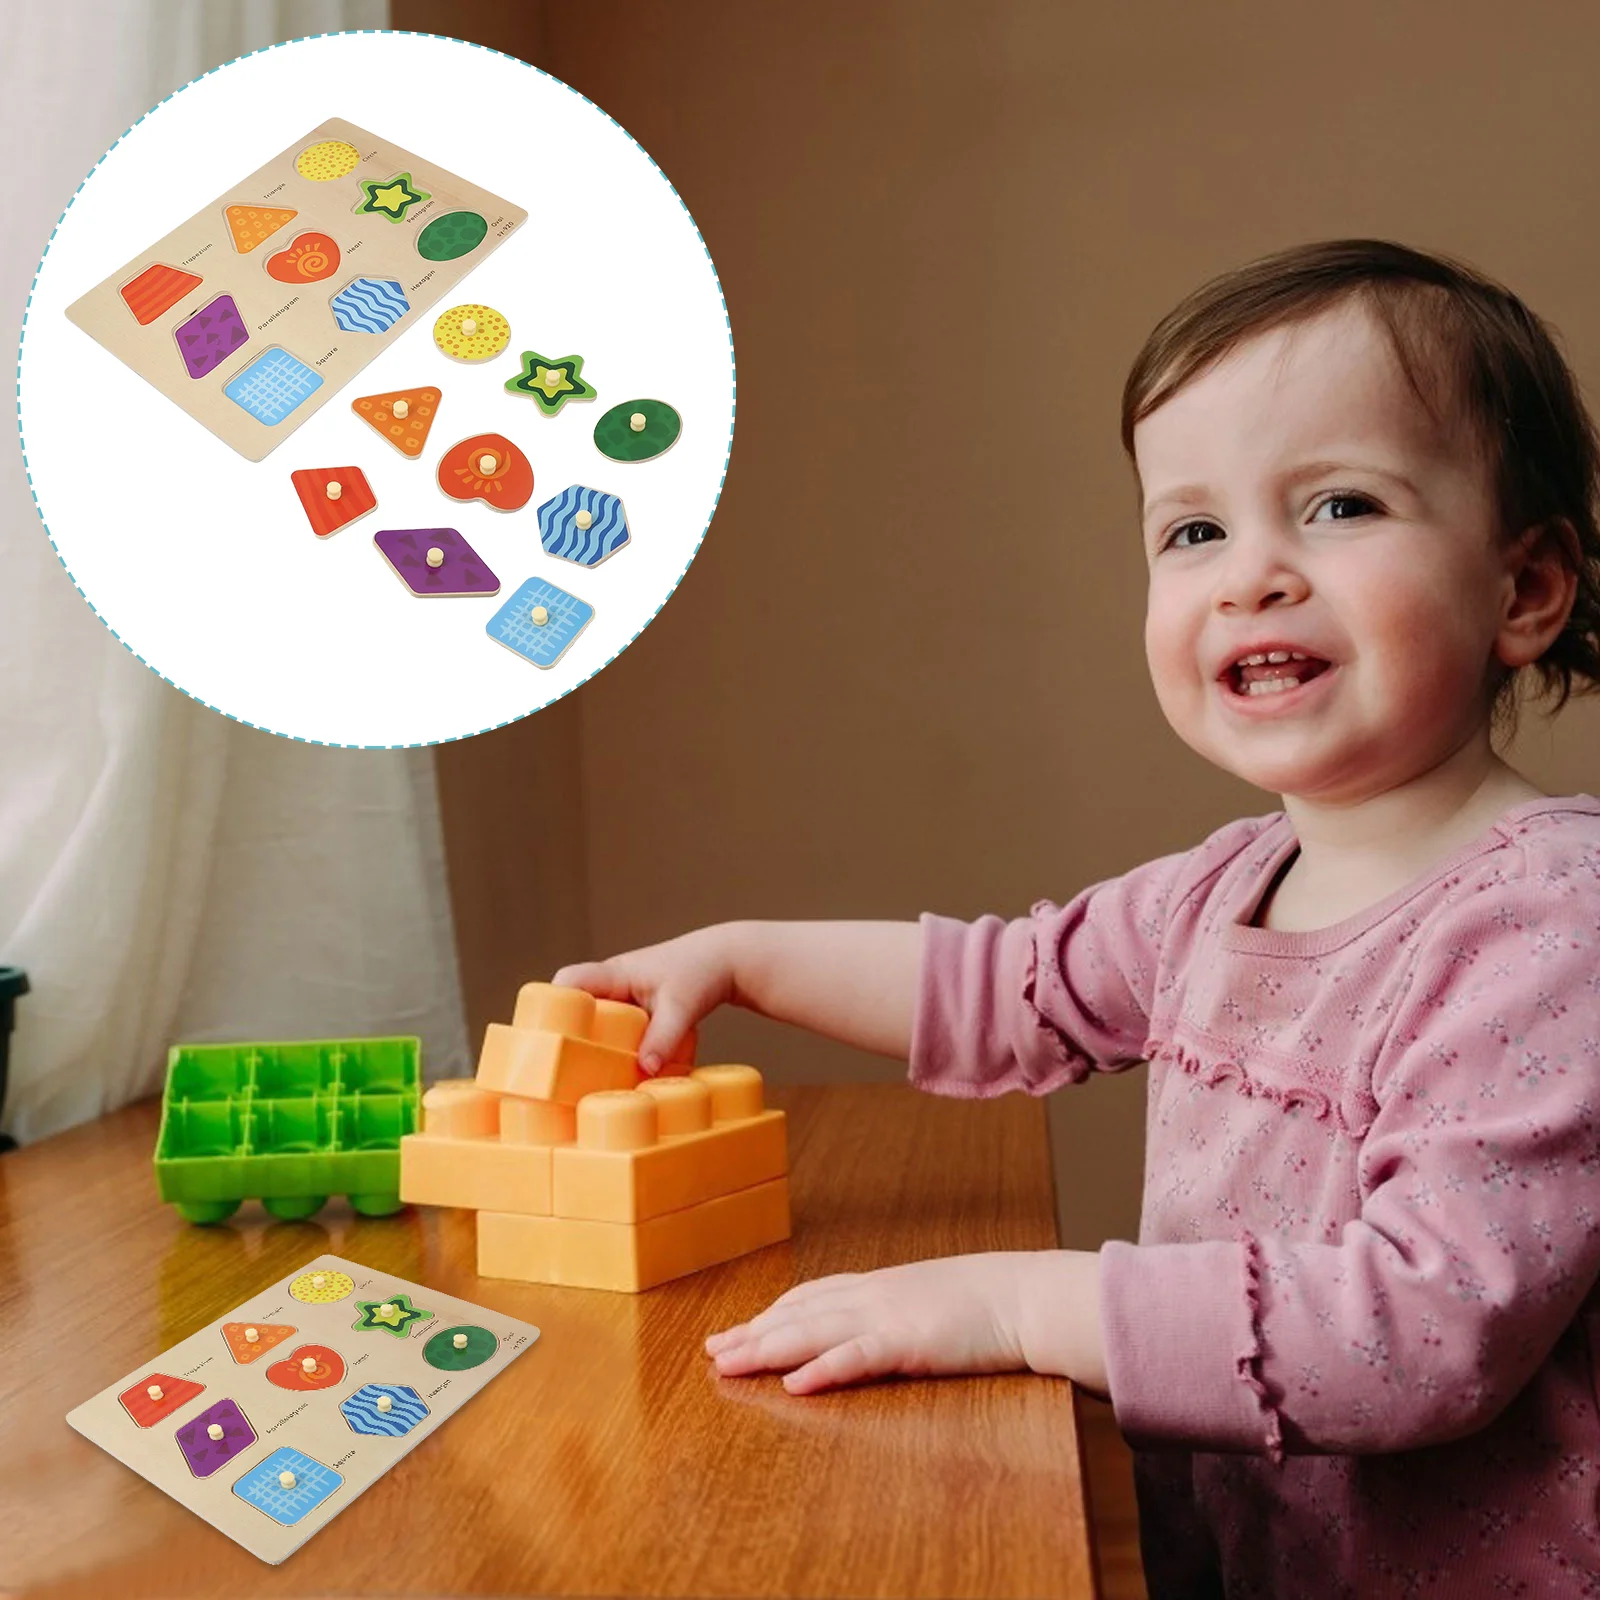 

Puzzle Cartoon Jigsaw Baby Stacking Toy Educational Matching Wooden Toys Earth Tones Children